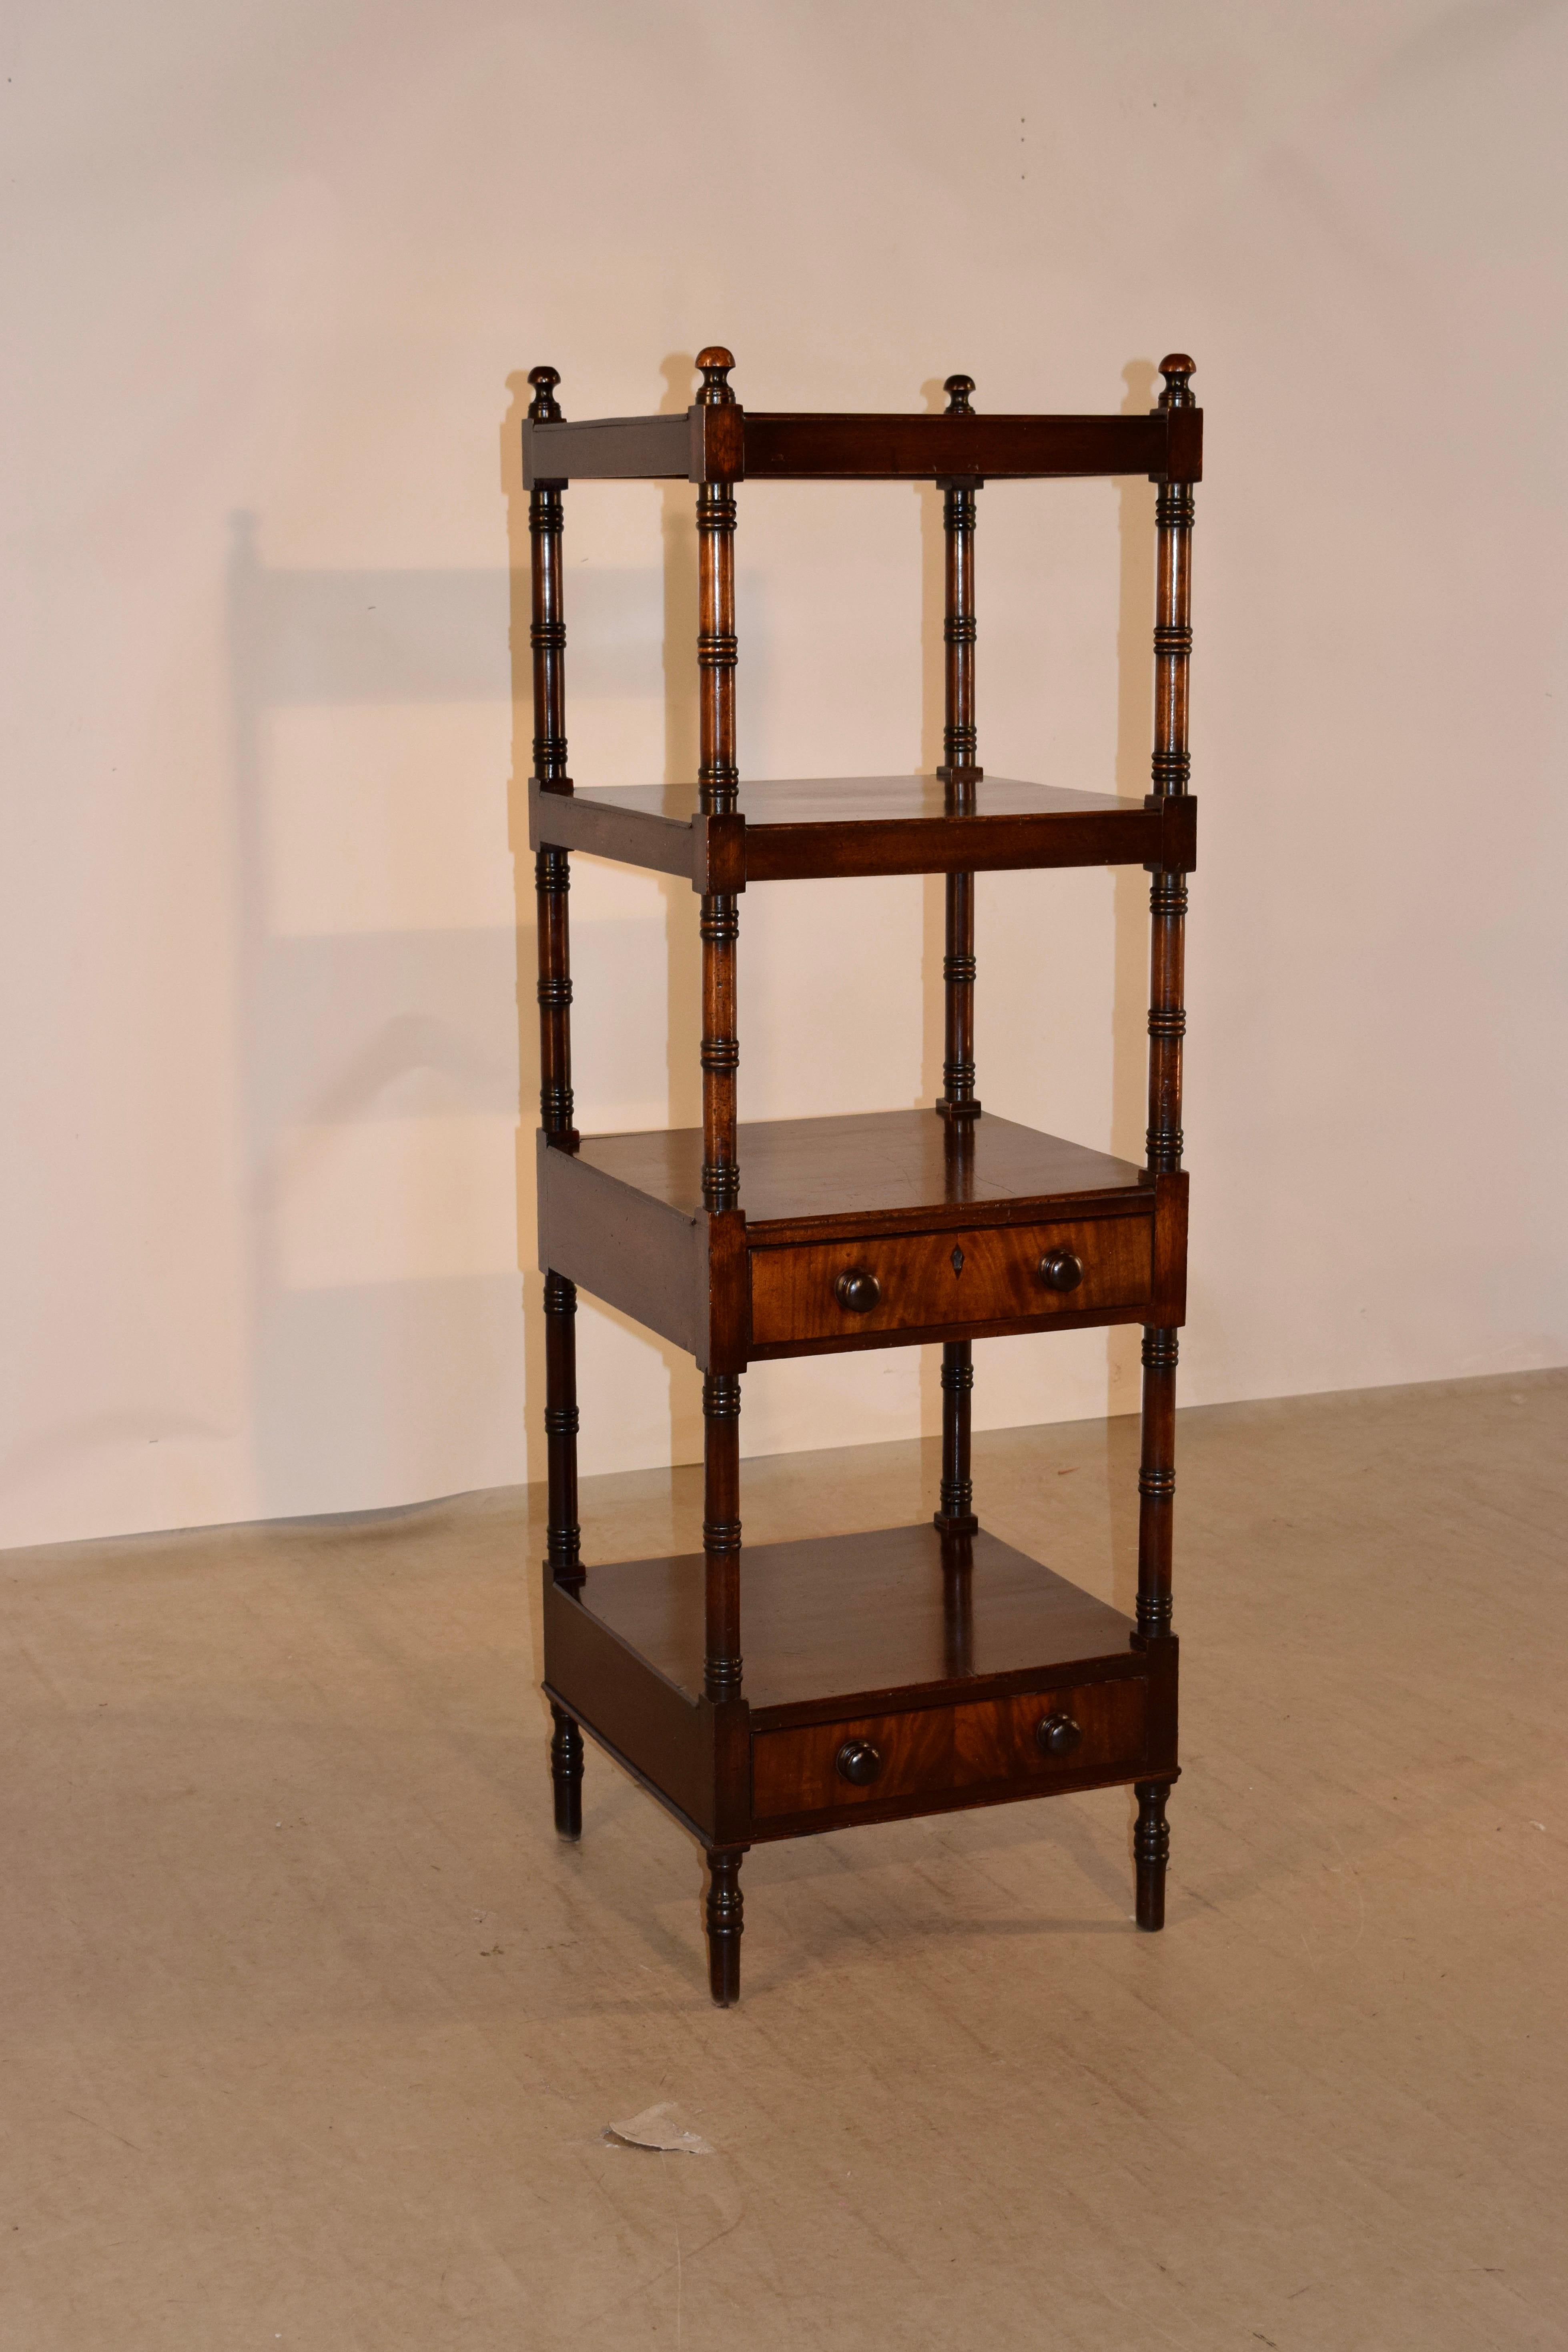 19th century mahogany shelf from England with finials decorating the top and four shelves, all separated by hand turned shelf supports. The two lower shelves have single drawers beneath, which is an unusual feature. The piece is raised on hand